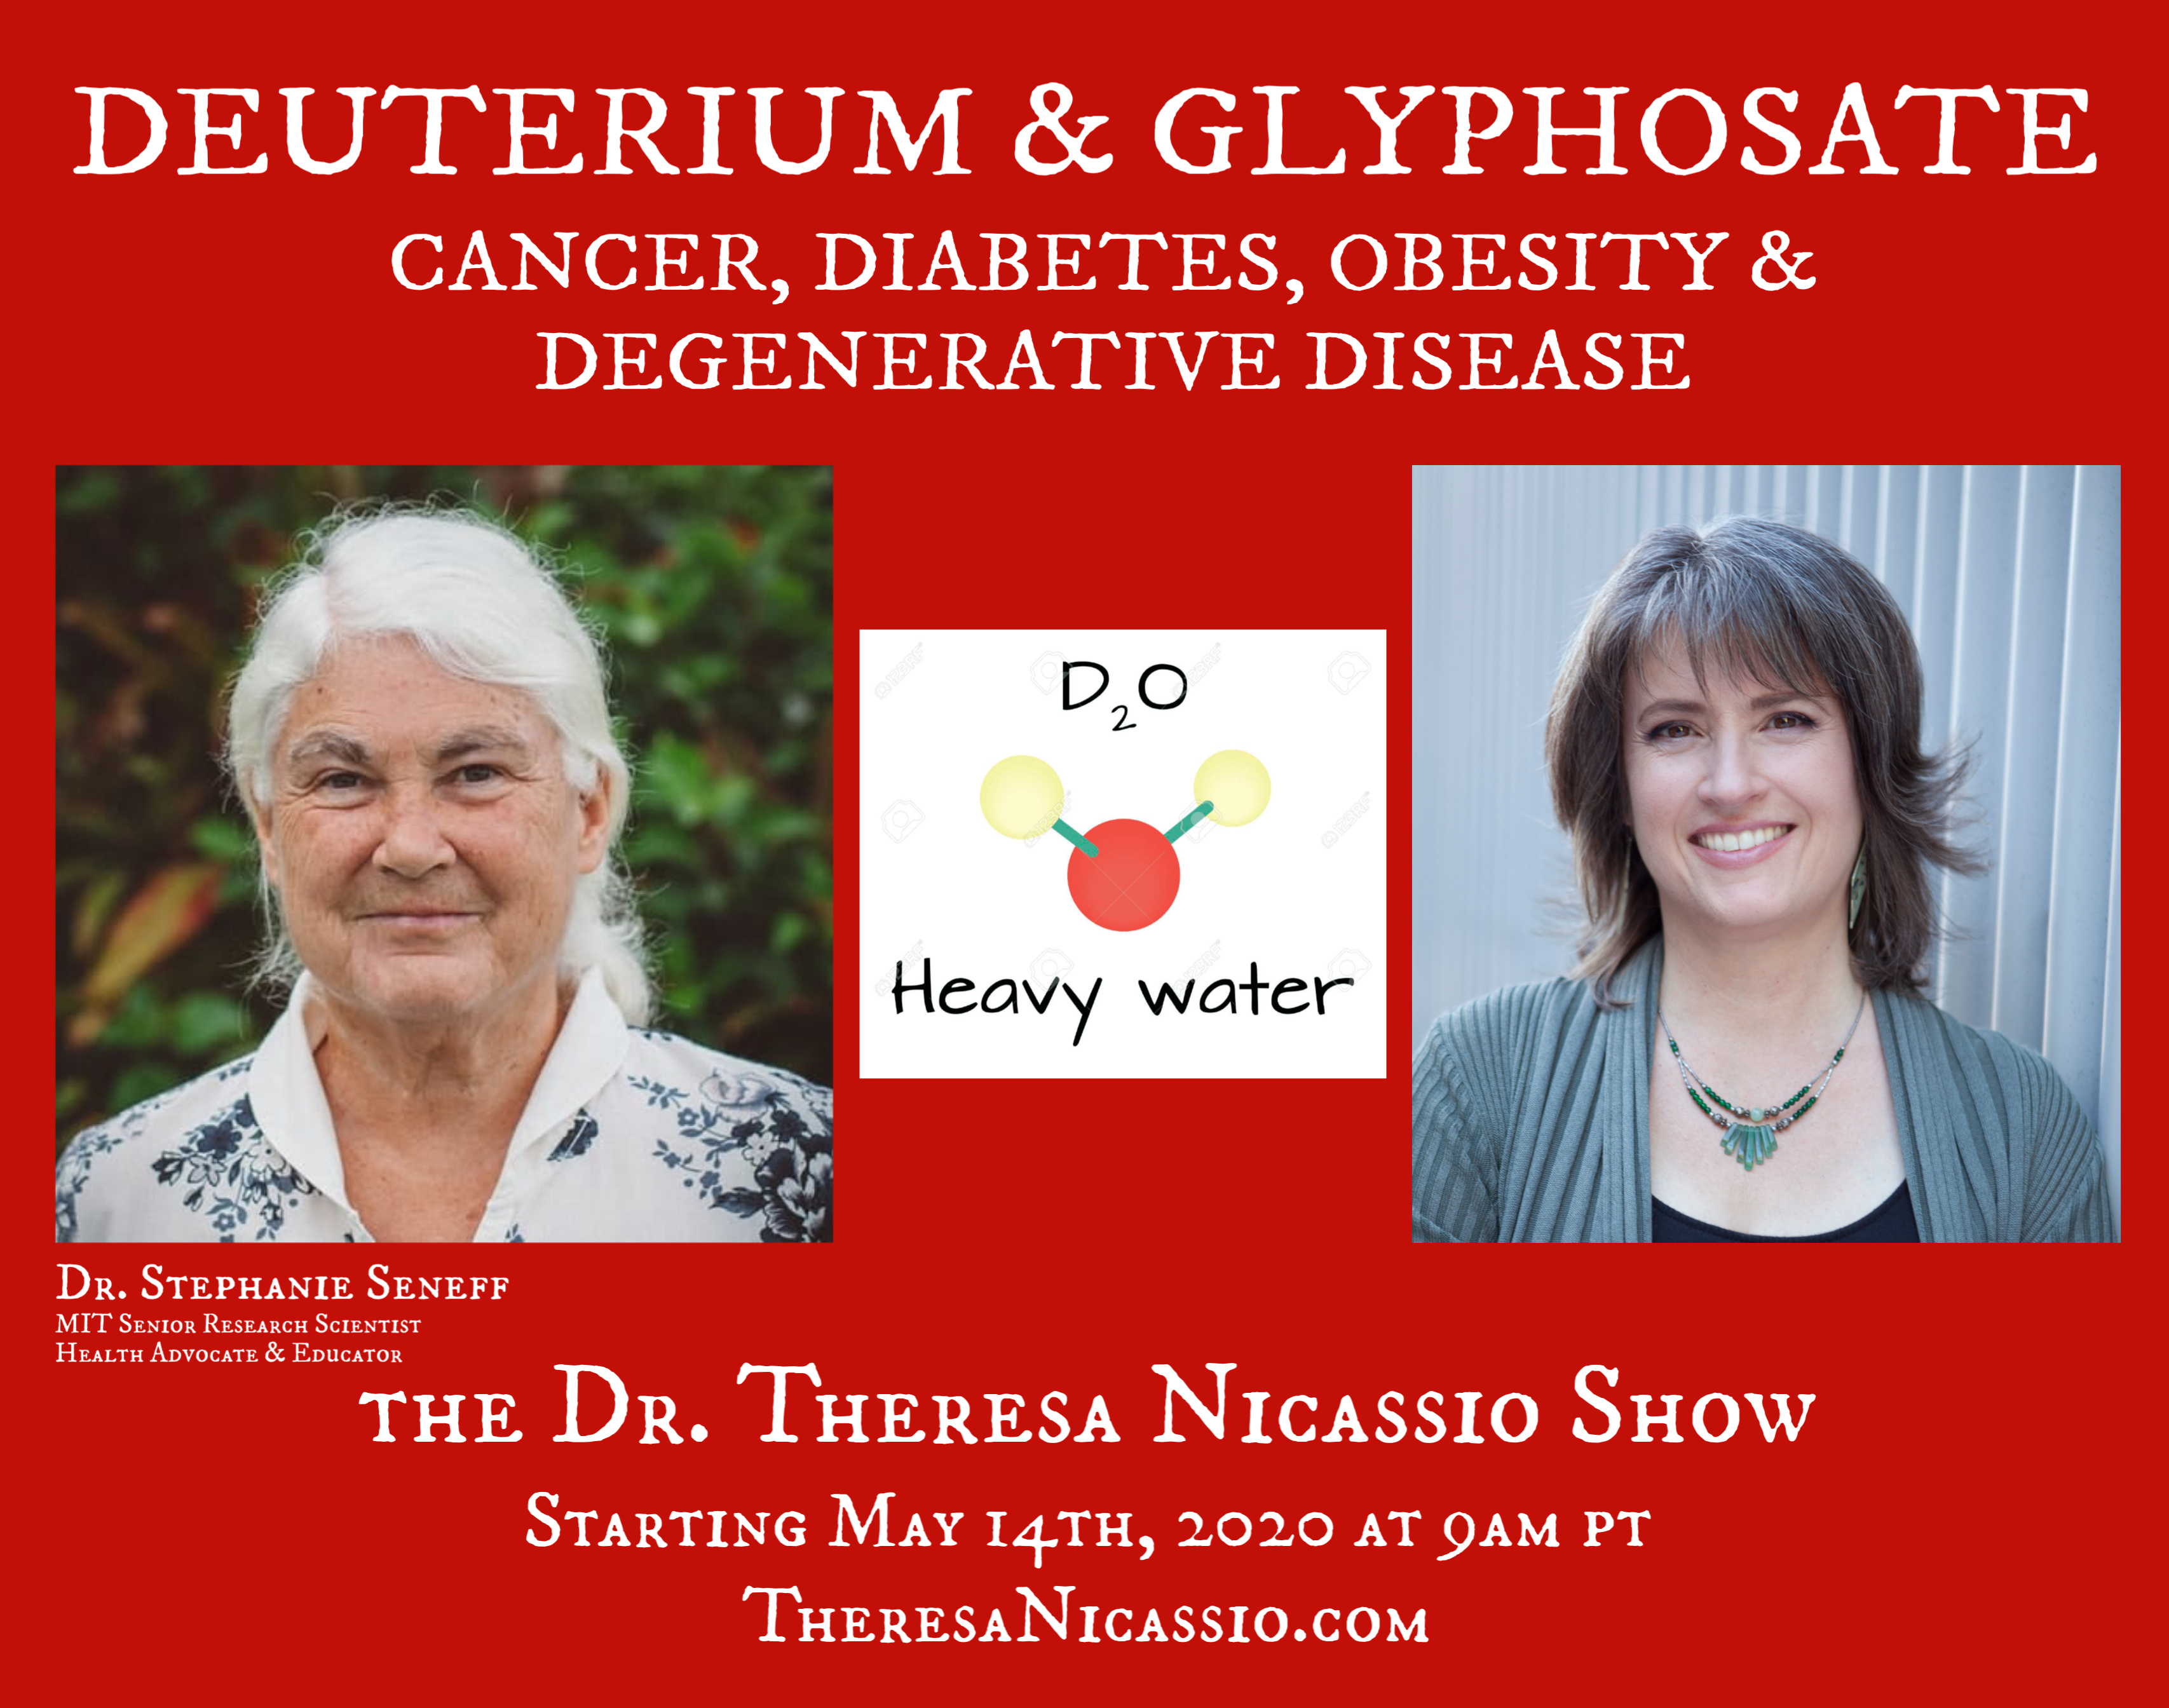 Hear leading MIT Senior Scientist & Health Advocate Dr. Stephanie Seneff talk about the role of DEUTERIUM, GLYPHOSATE & YOUR HEALTH on The Dr. Theresa Nicassio Show on Healthy Life Radio.